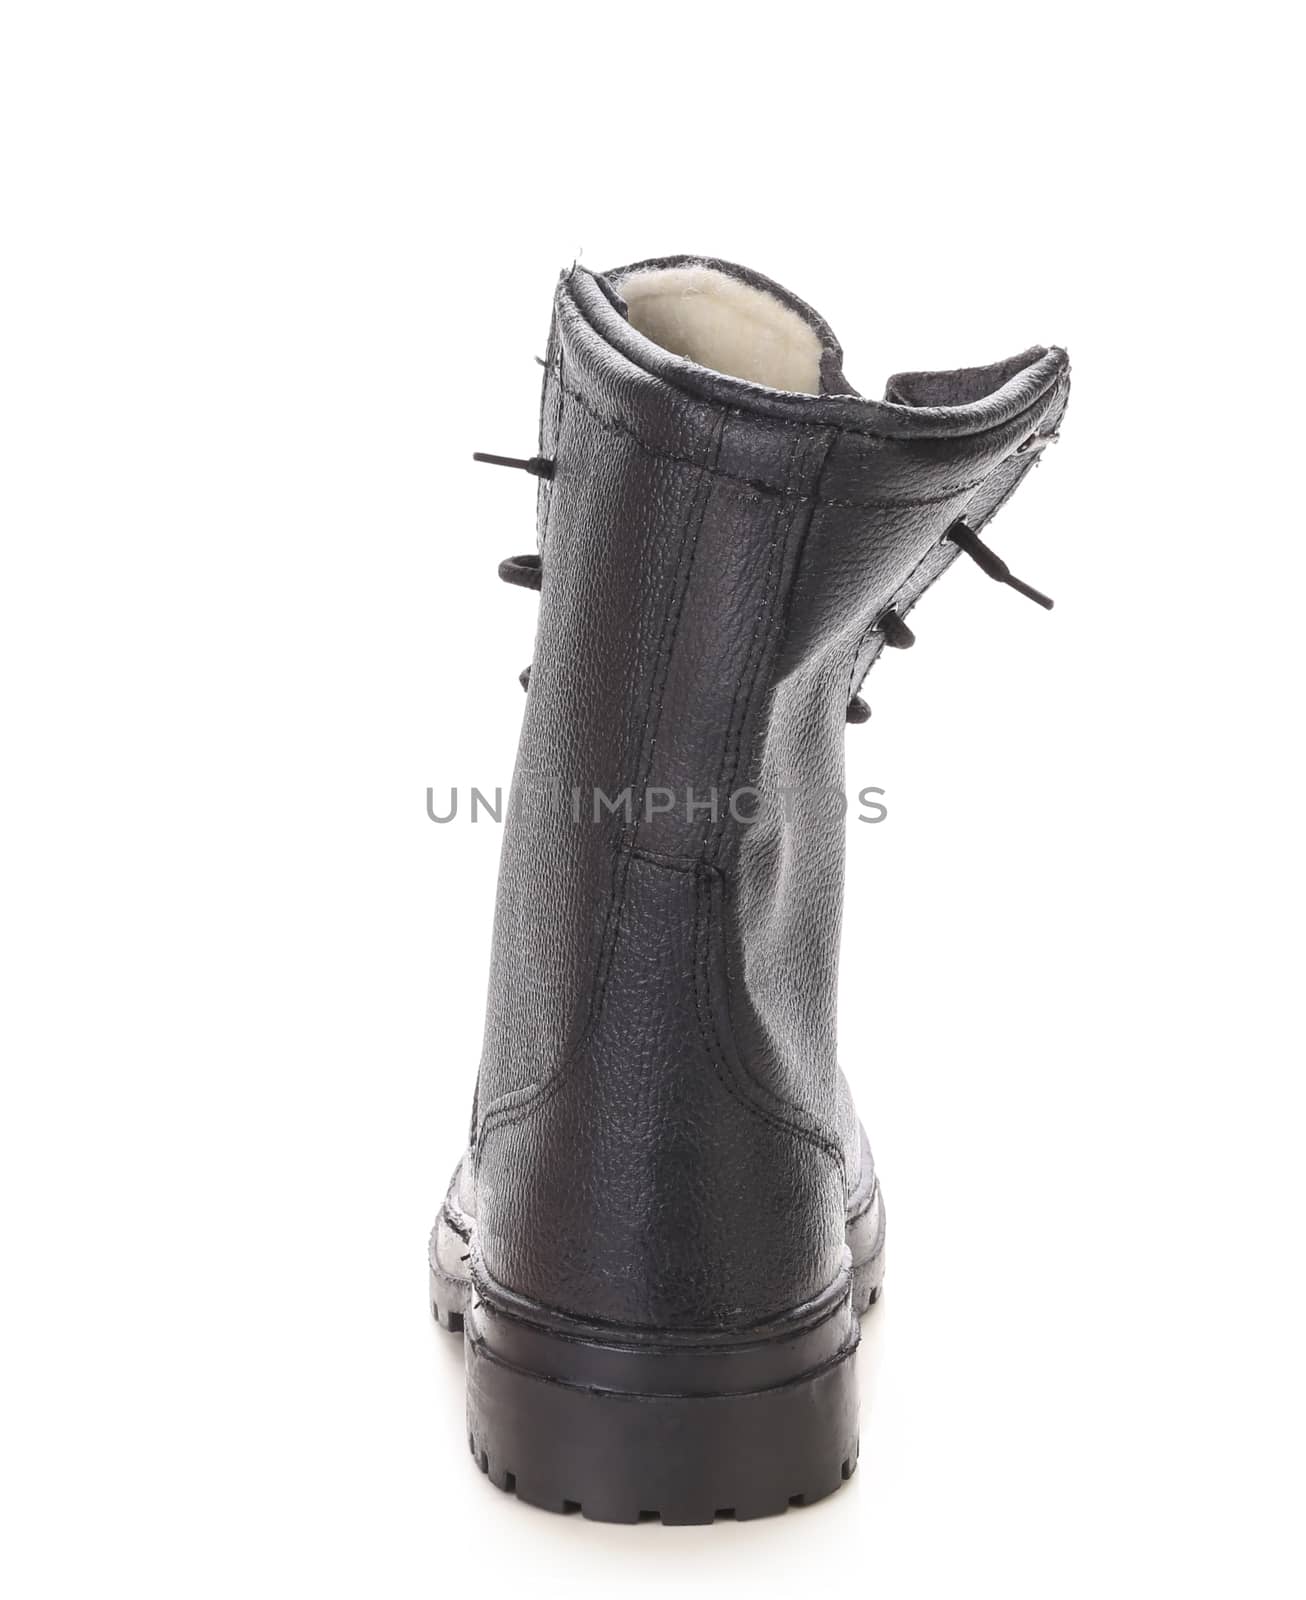 Back side of high leather boot. Isolated on a white background.